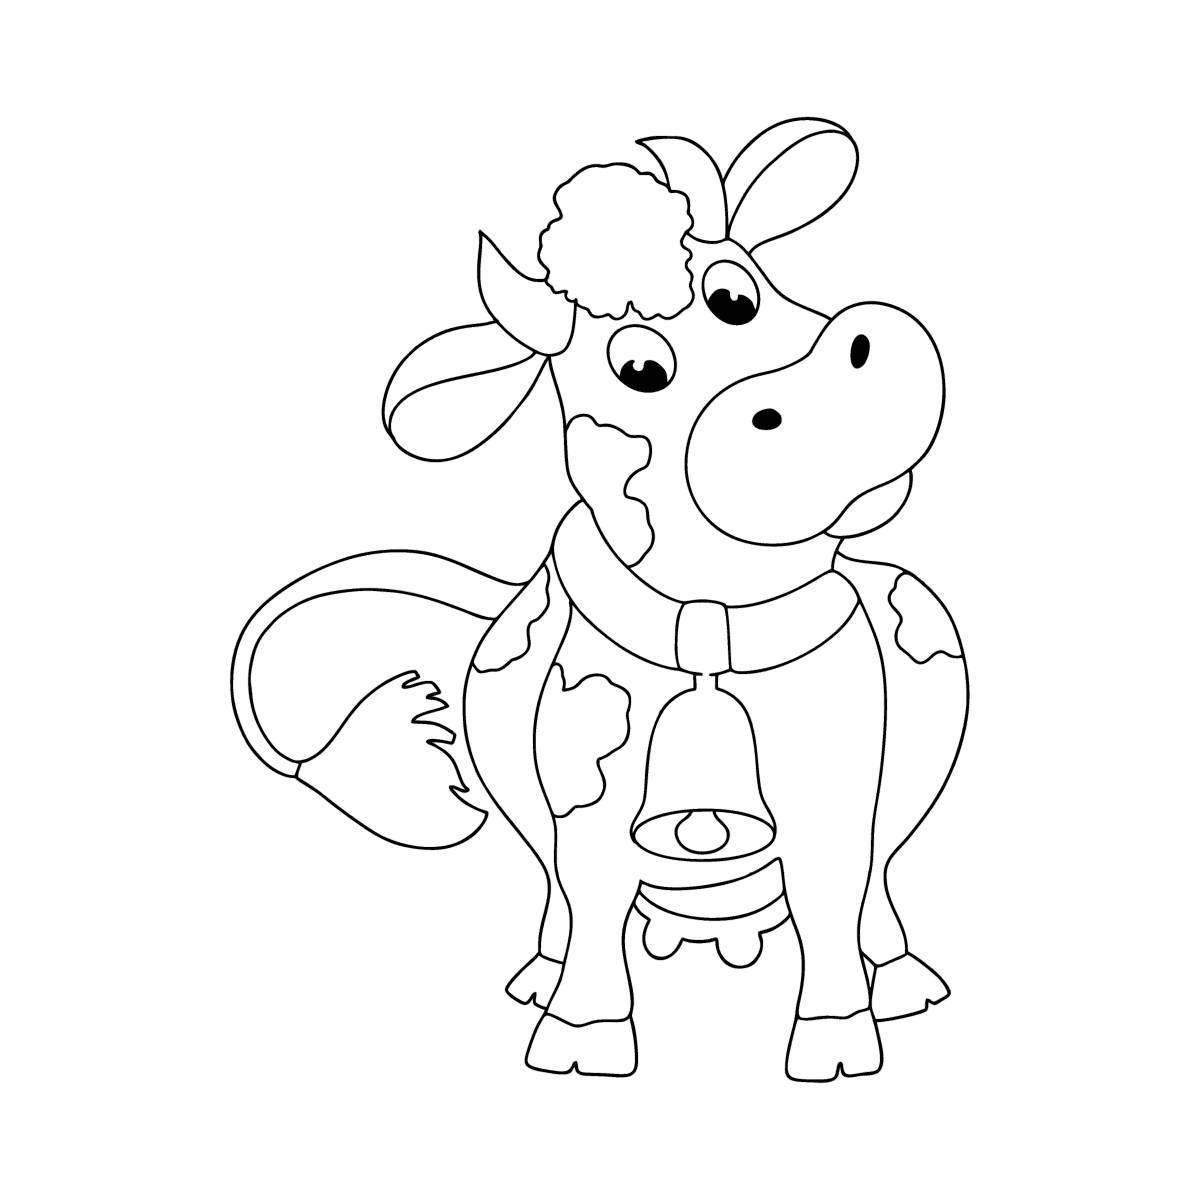 Coloring page funny cow and calf